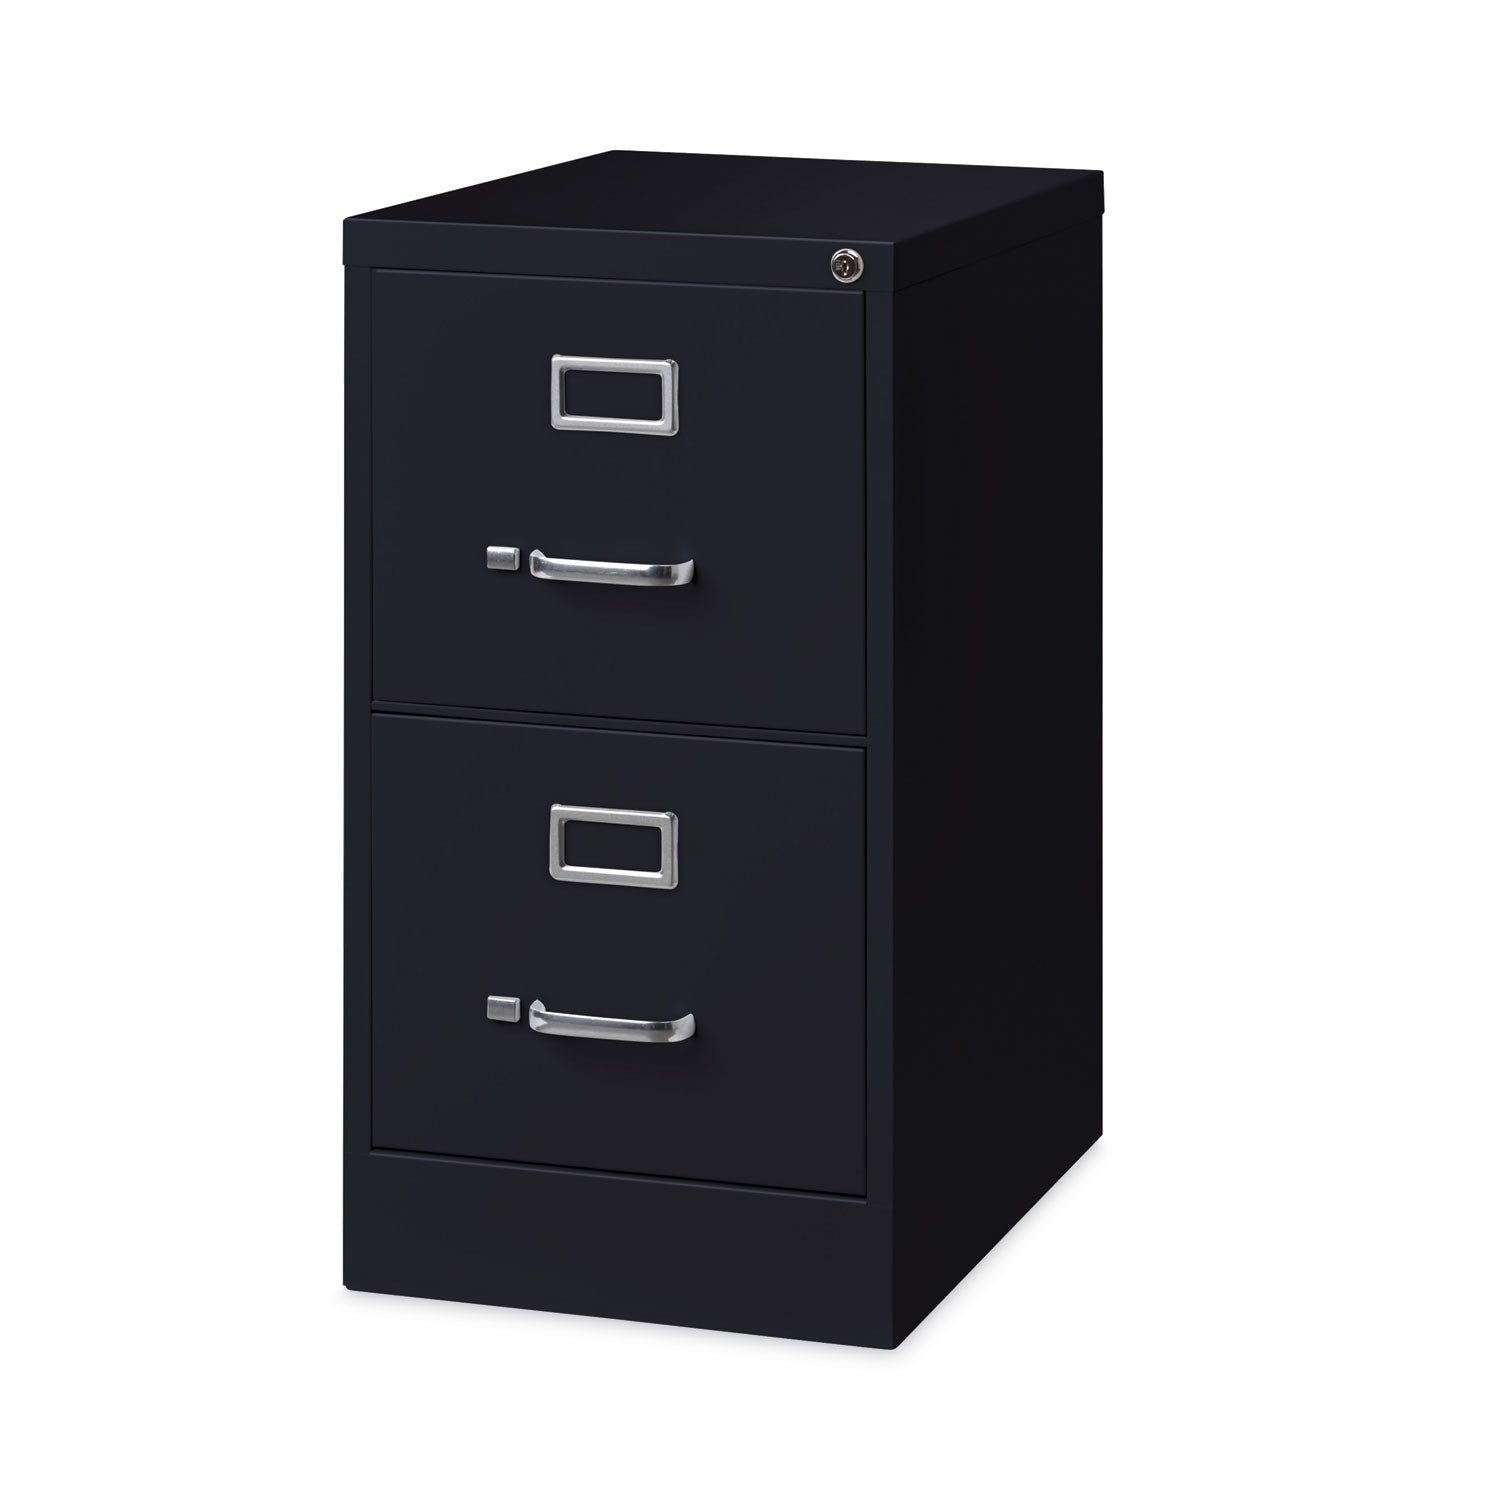 vertical-letter-file-cabinet-2-letter-size-file-drawers-black-15-x-22-x-2837_hid17890 - 5